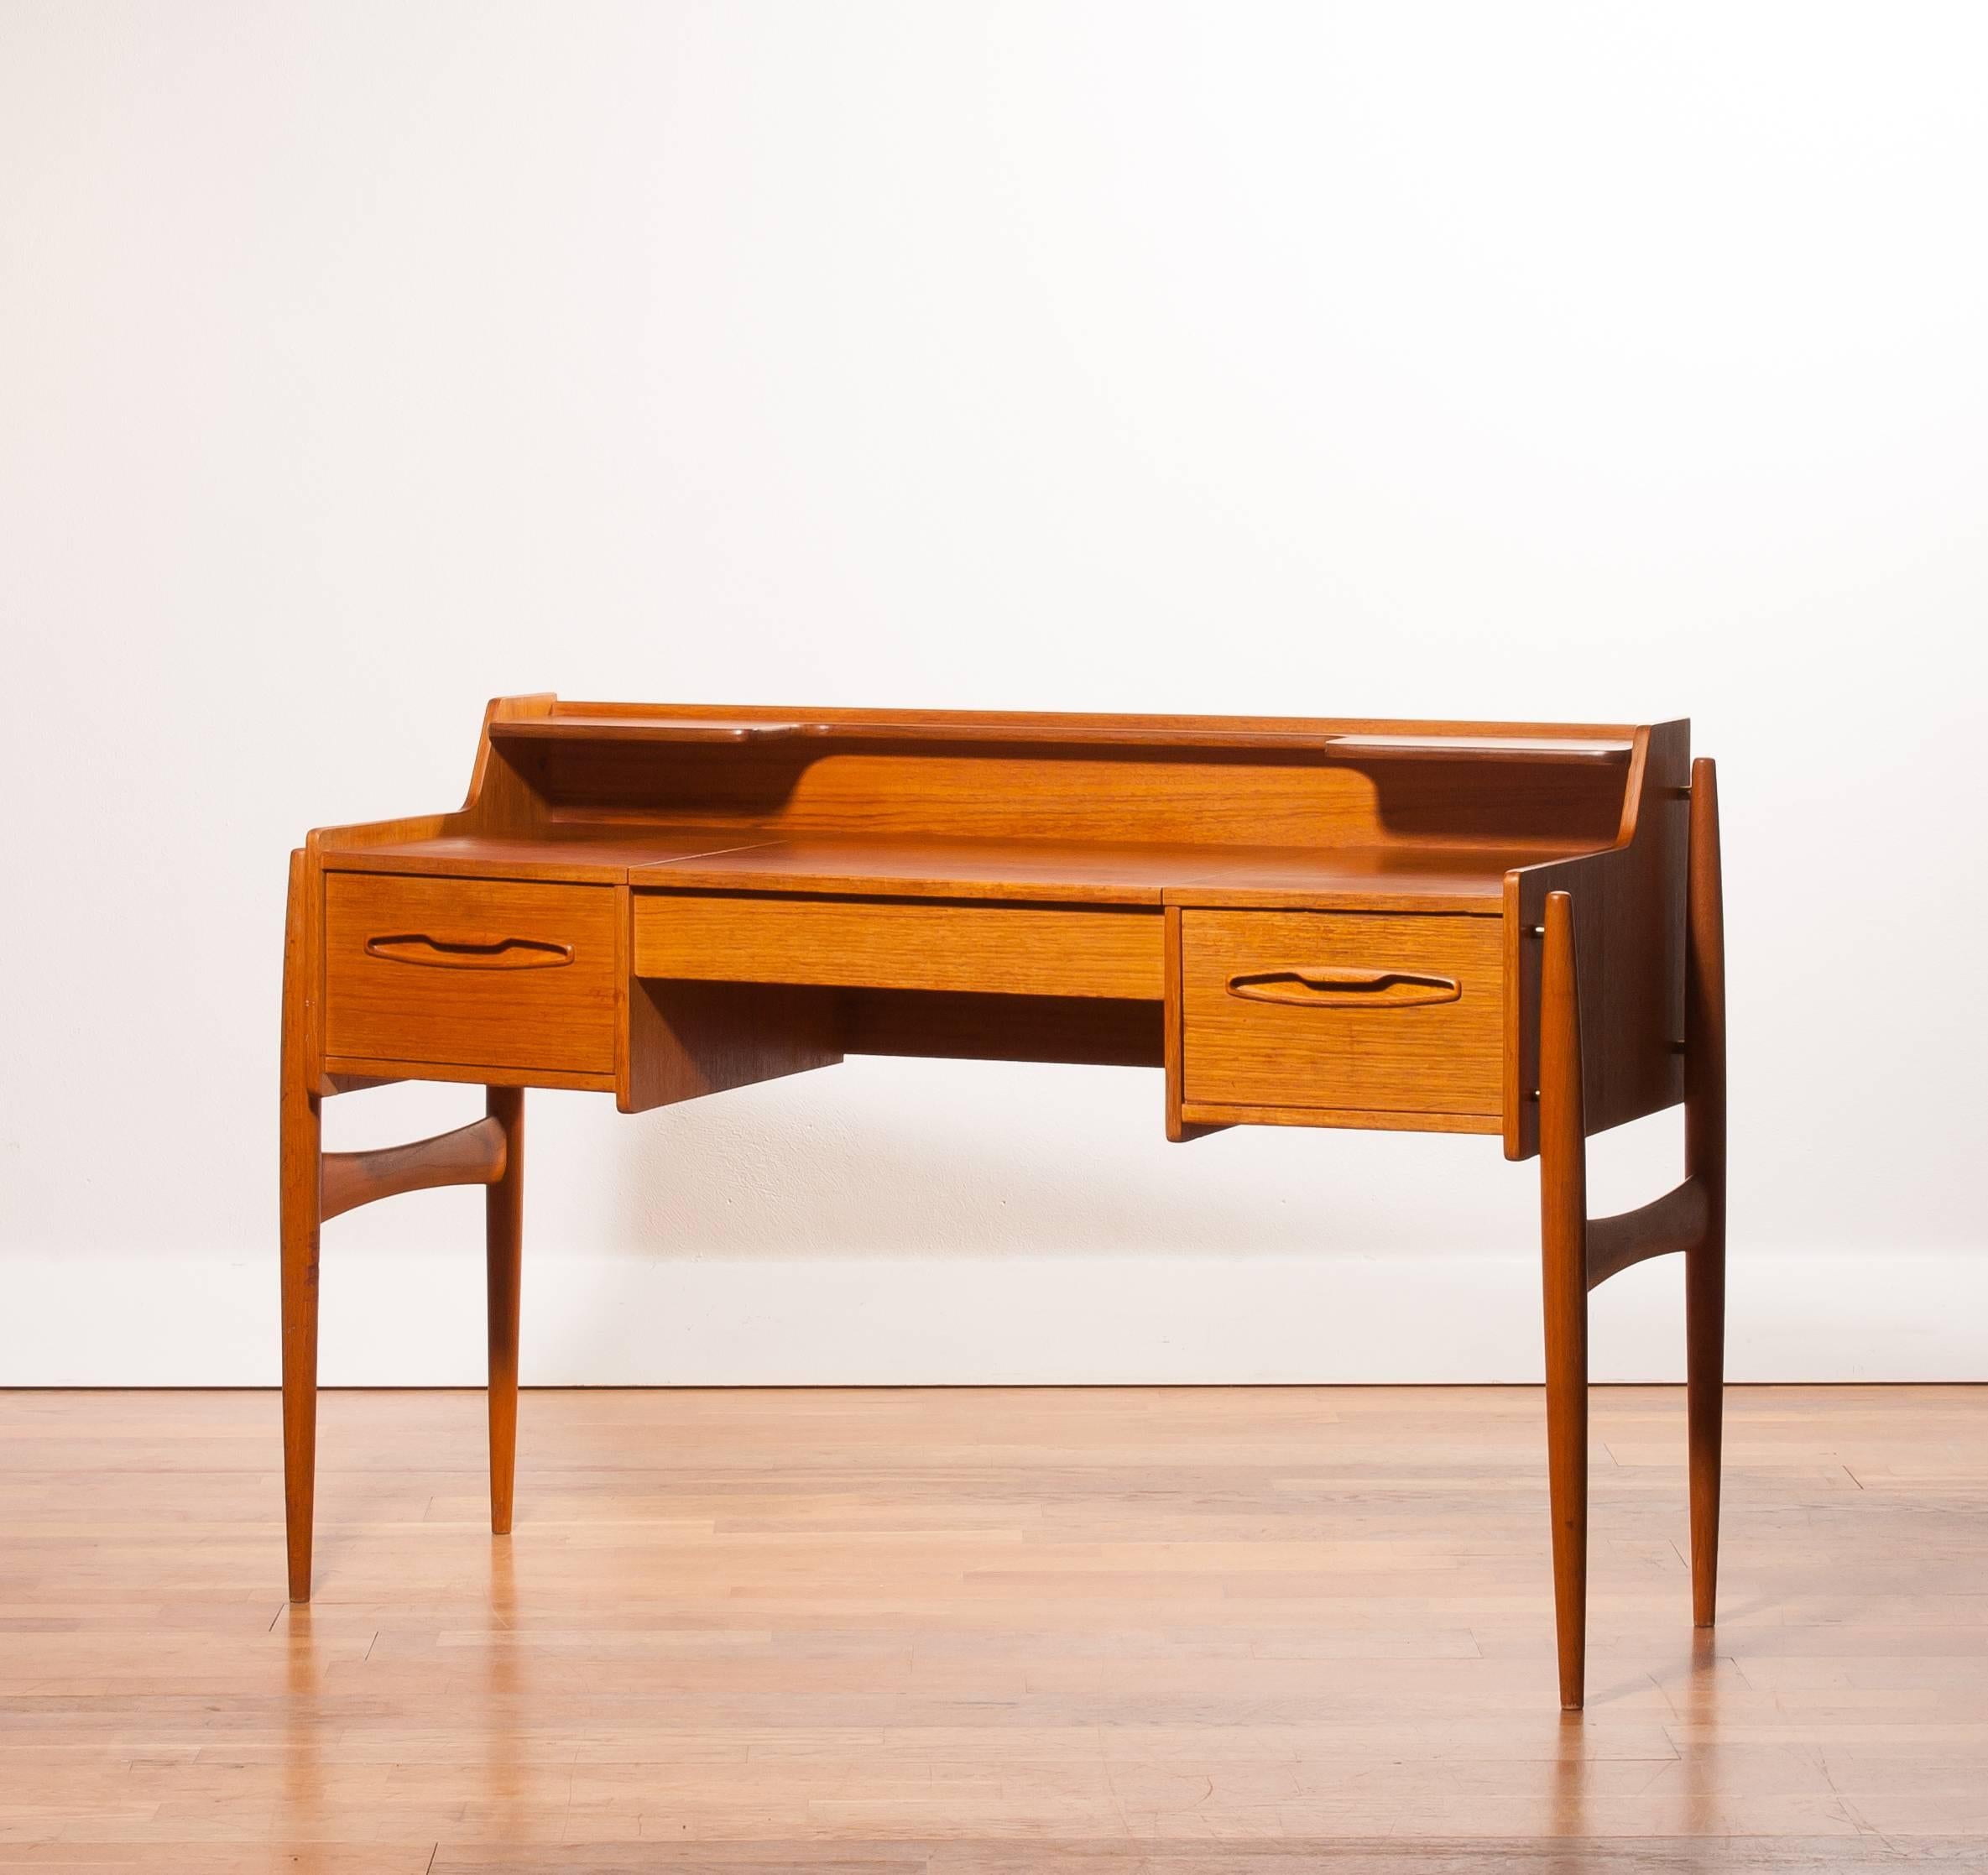 Very beautiful dressing table or desk made of teak.
The table has a mirror underneath the writing top.
It is in a very nice condition.
Made in Denmark.
Period 1950s
Dimensions: H 79 cm , W 120 cm , D 45 cm.